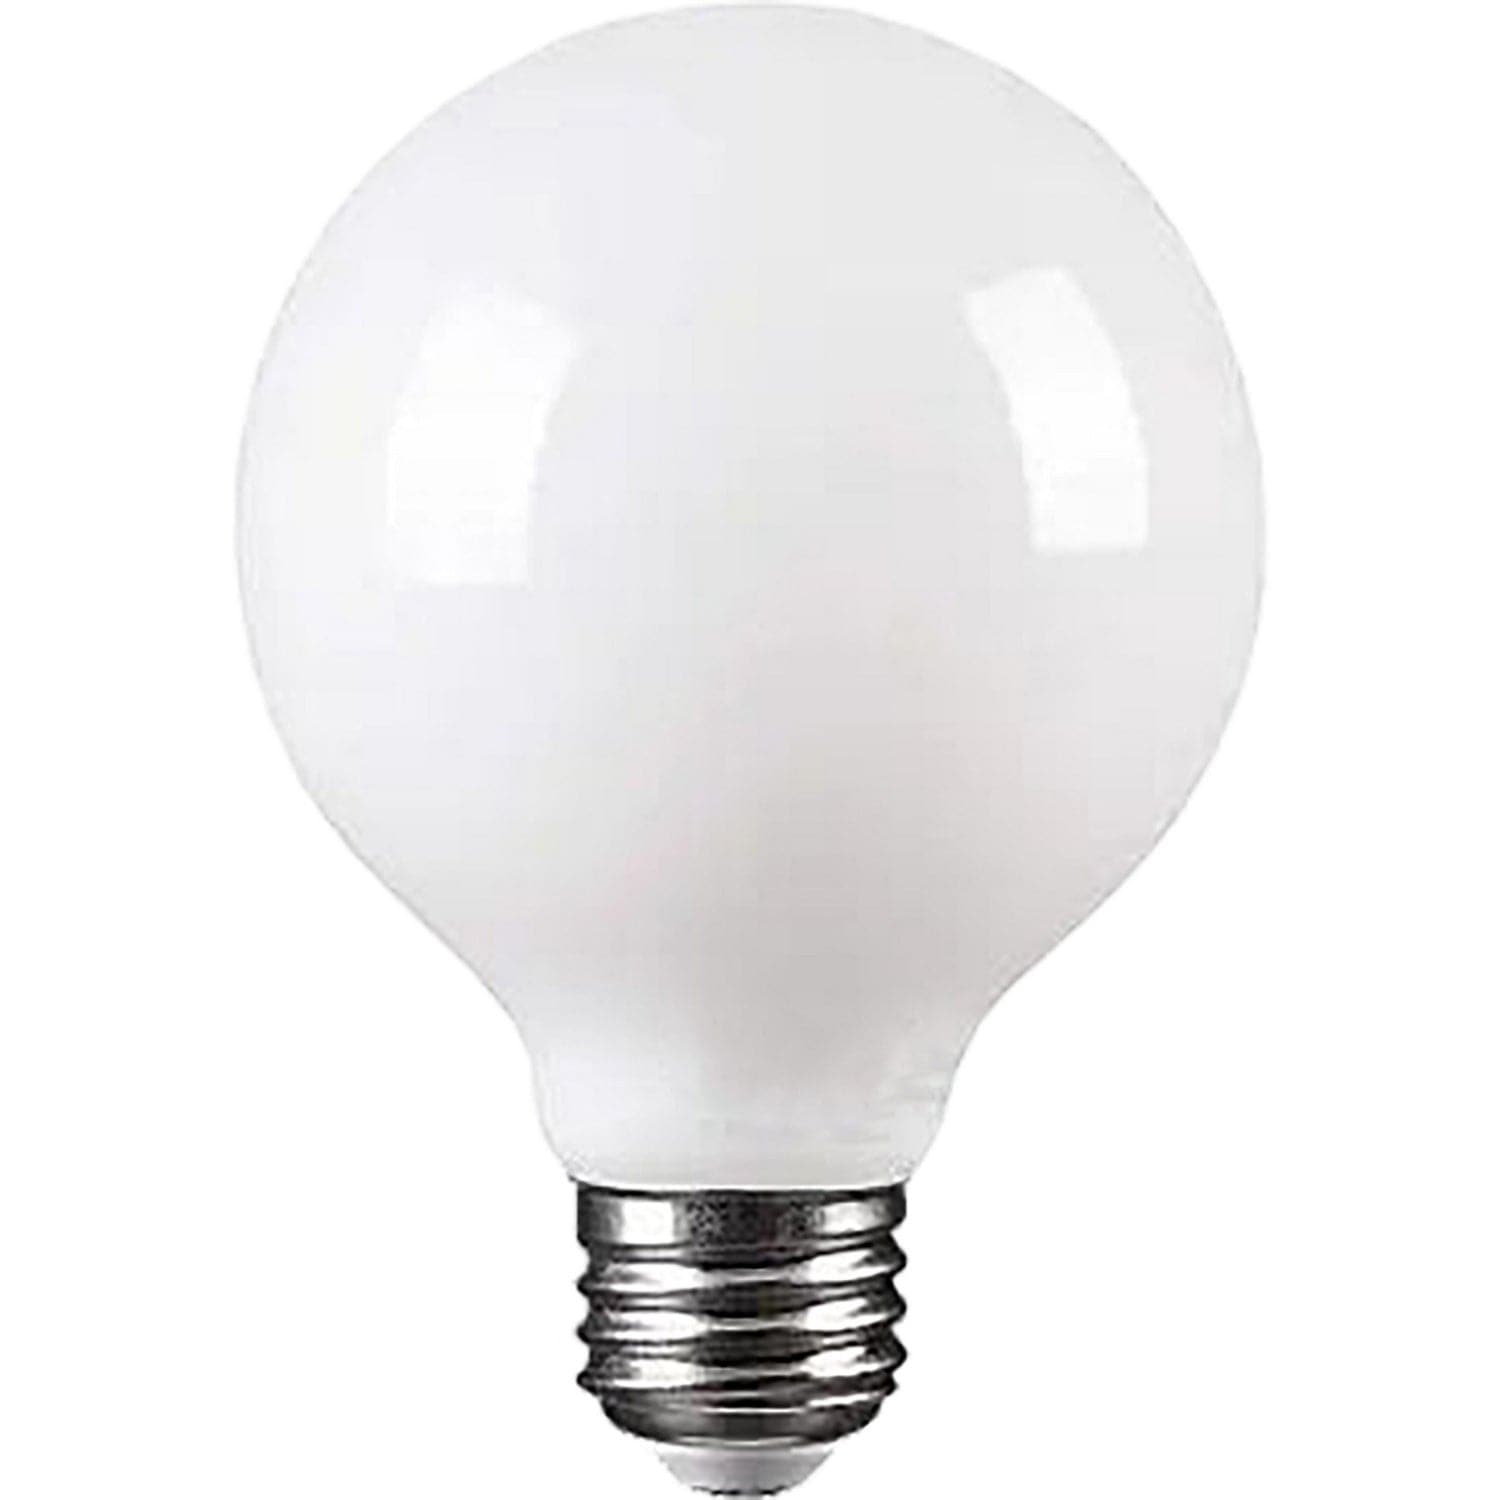 Renwil - LB033-3 - Light Bulb - Irving - Frosted